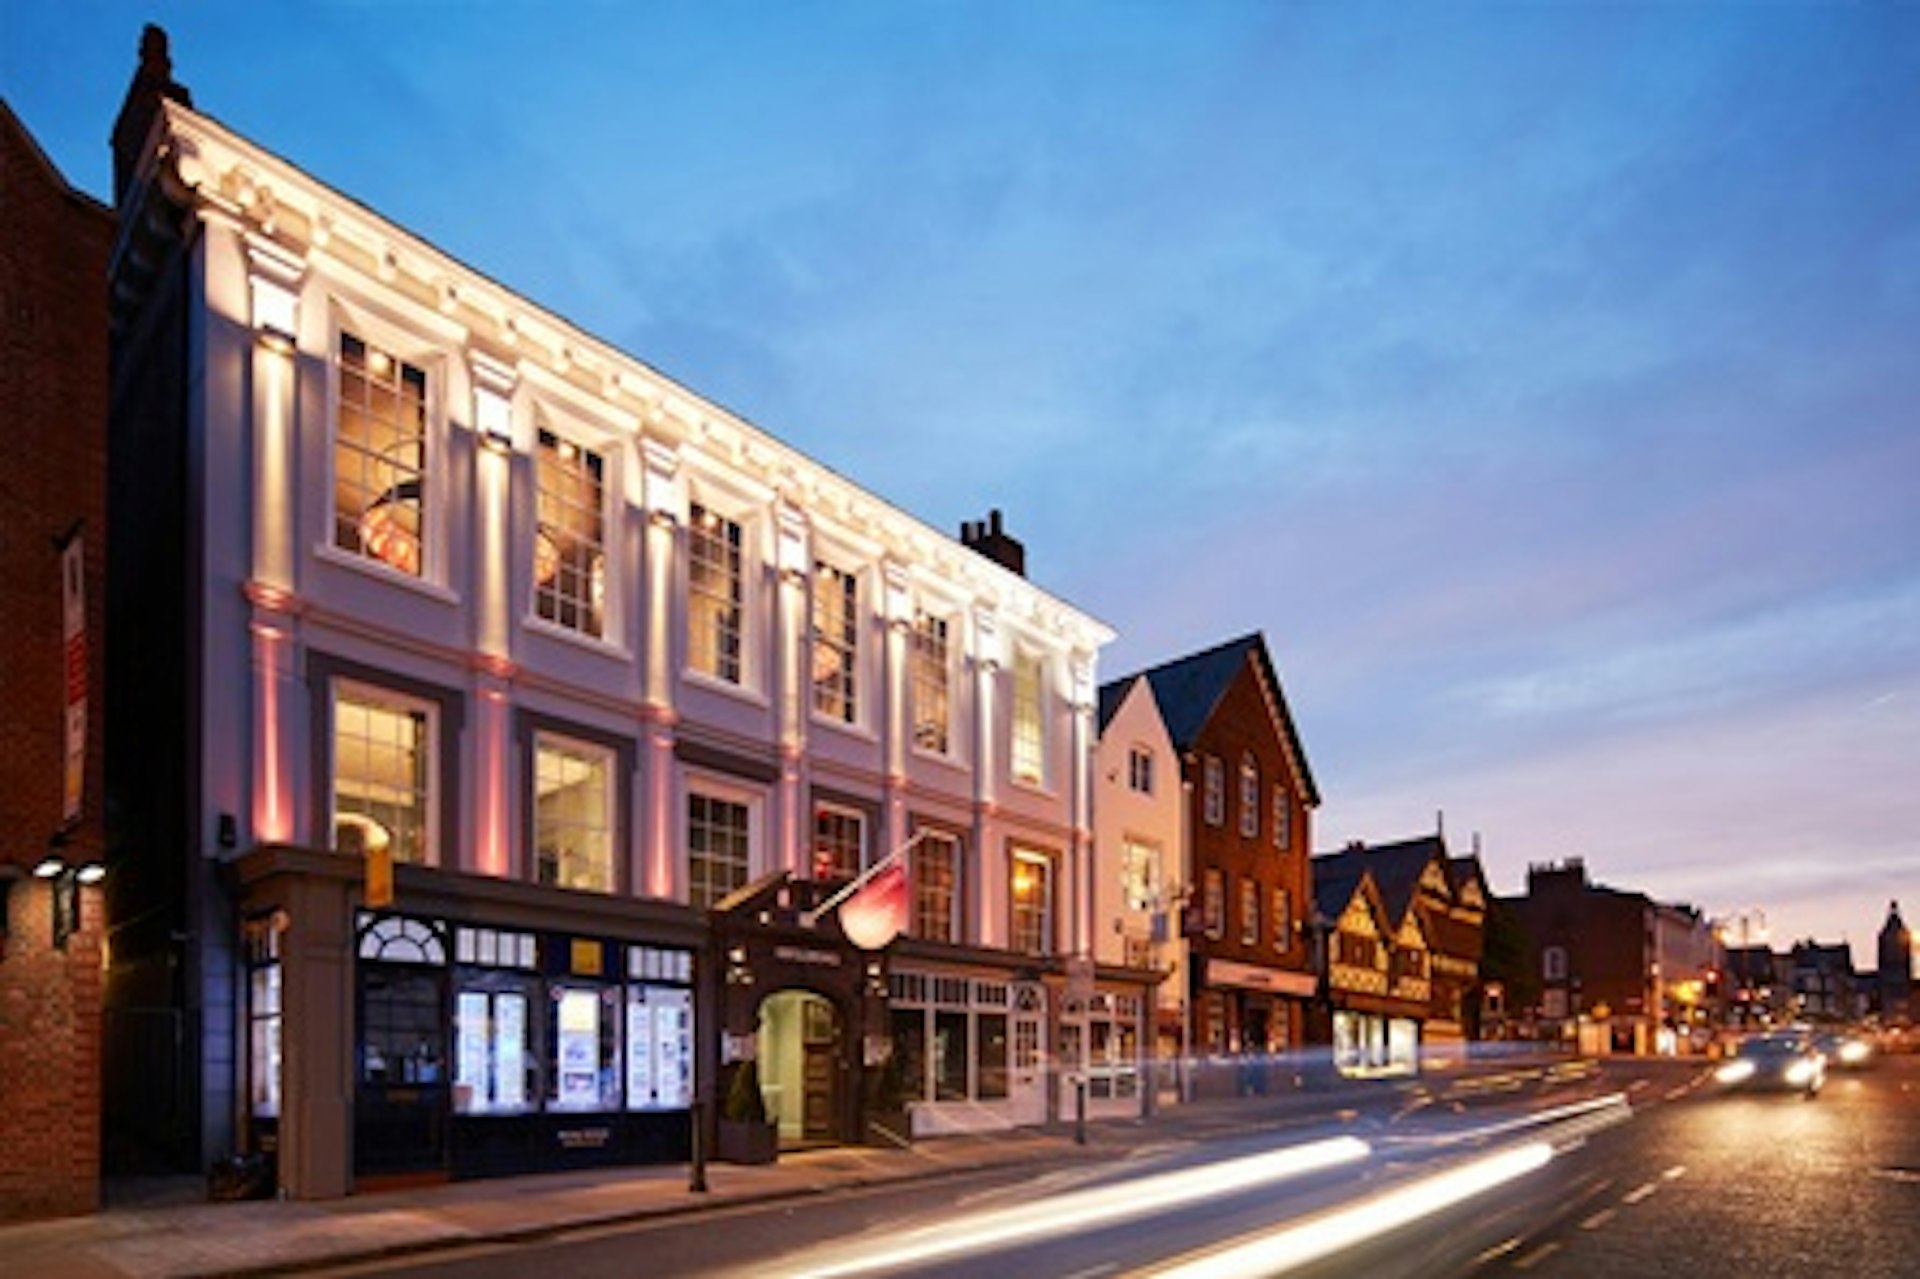 One Night 4* City Break with Dinner for Two at the Oddfellows Chester 4